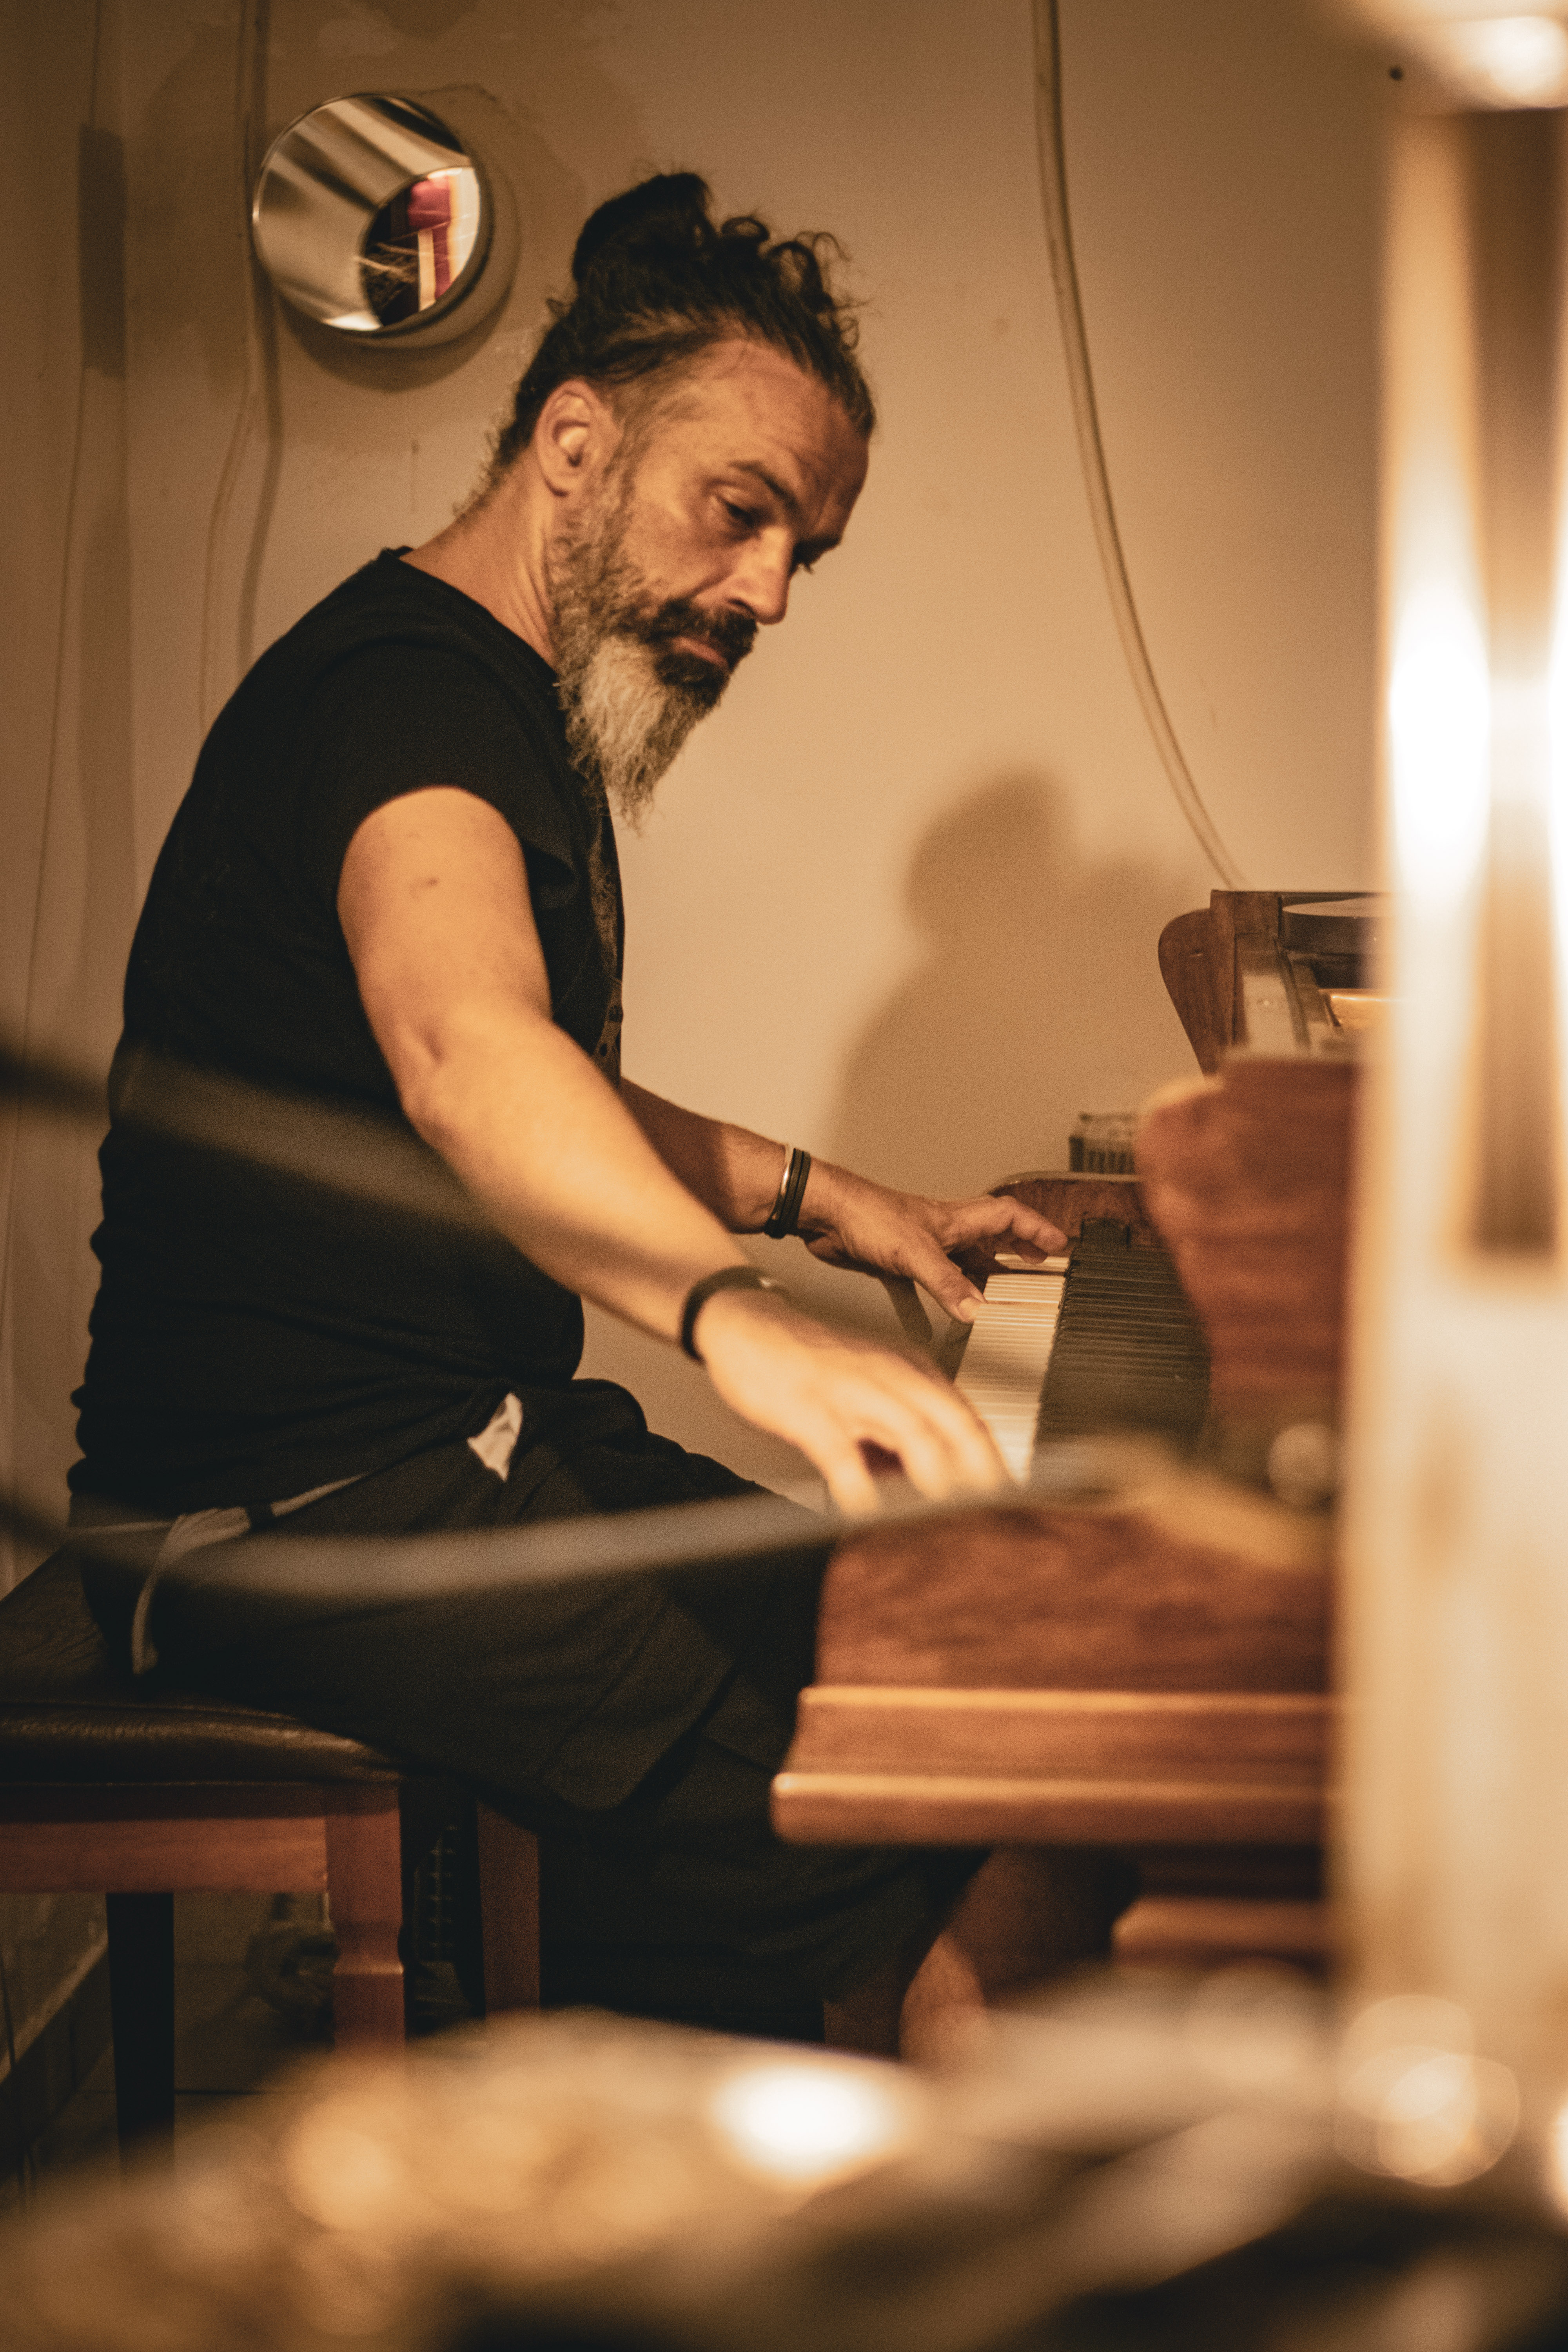 George Bokos (Grindhouse Studios Athens/Spine Audio) improvising on a vintage John Broadwood & Sons grand piano, manufactured in London in 1904.